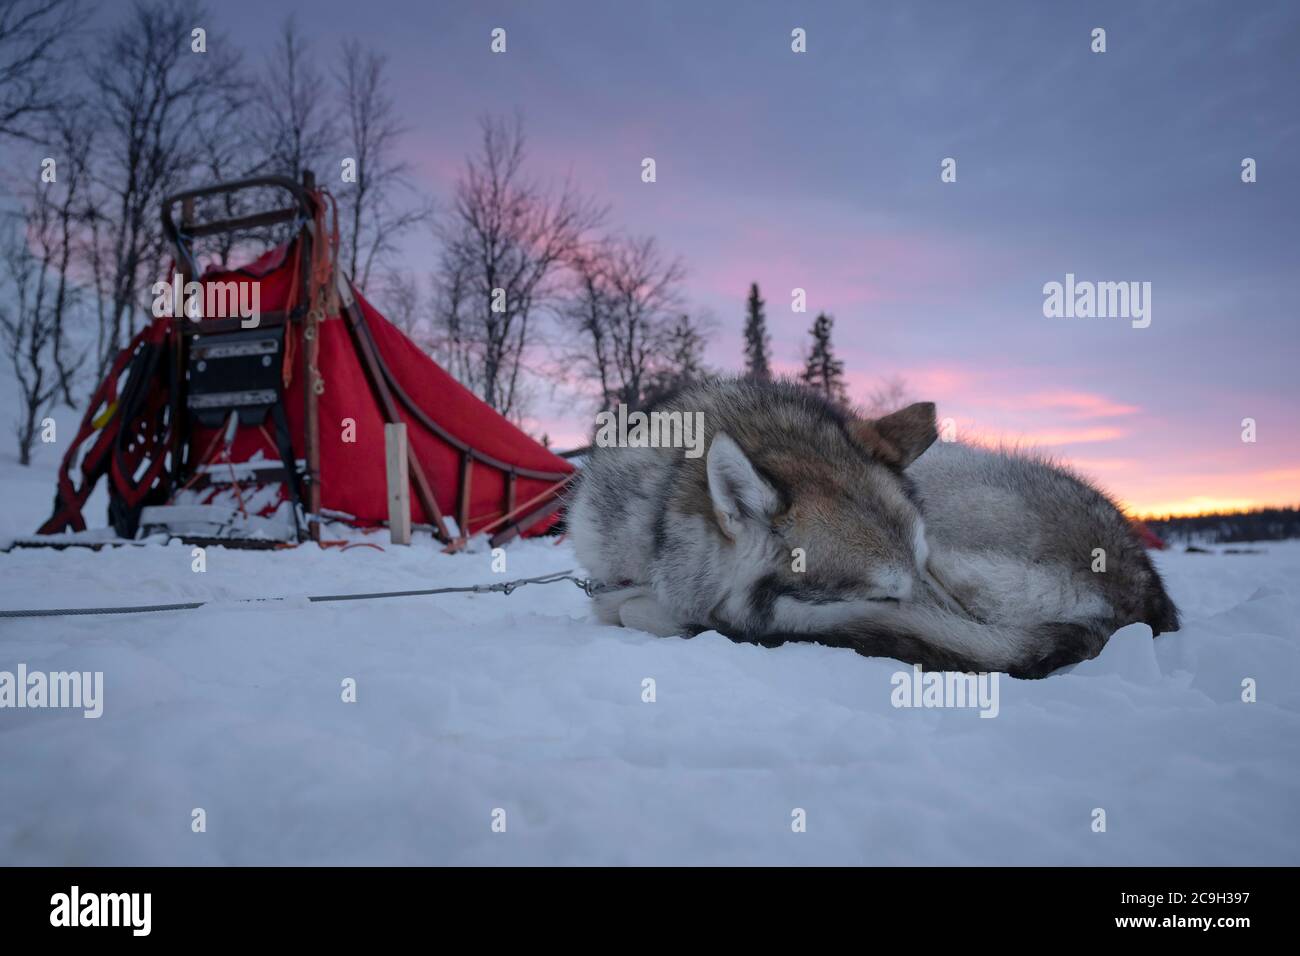 Husky next to dog sled resting in the snow at dawn, Skaulo, Norrbottens laen, Sweden Stock Photo